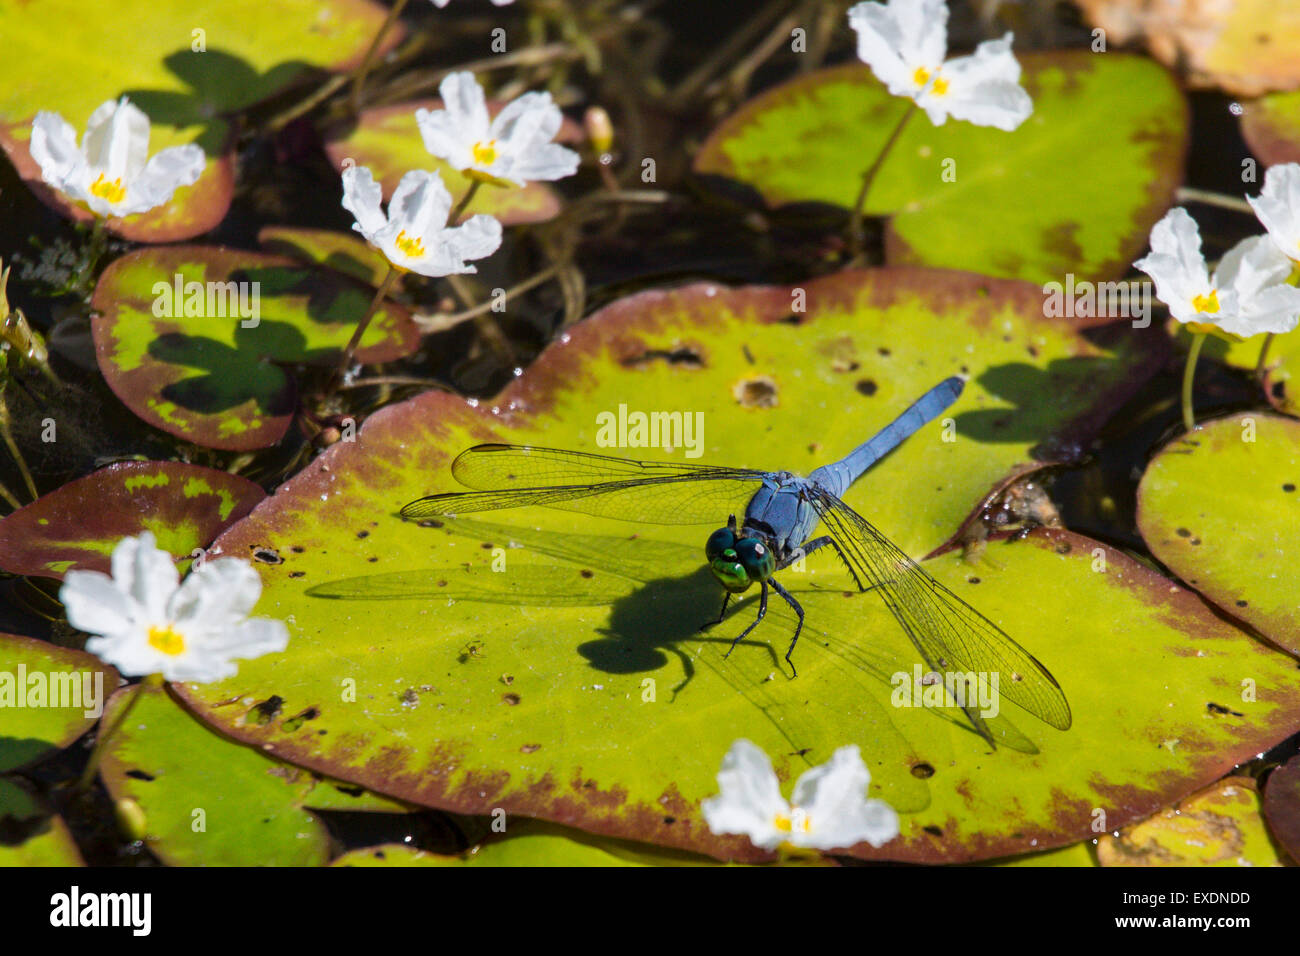 Dragonfly on Lily Pads with blooming white lilies in Red Bug Slough in Sarasota Florida Stock Photo